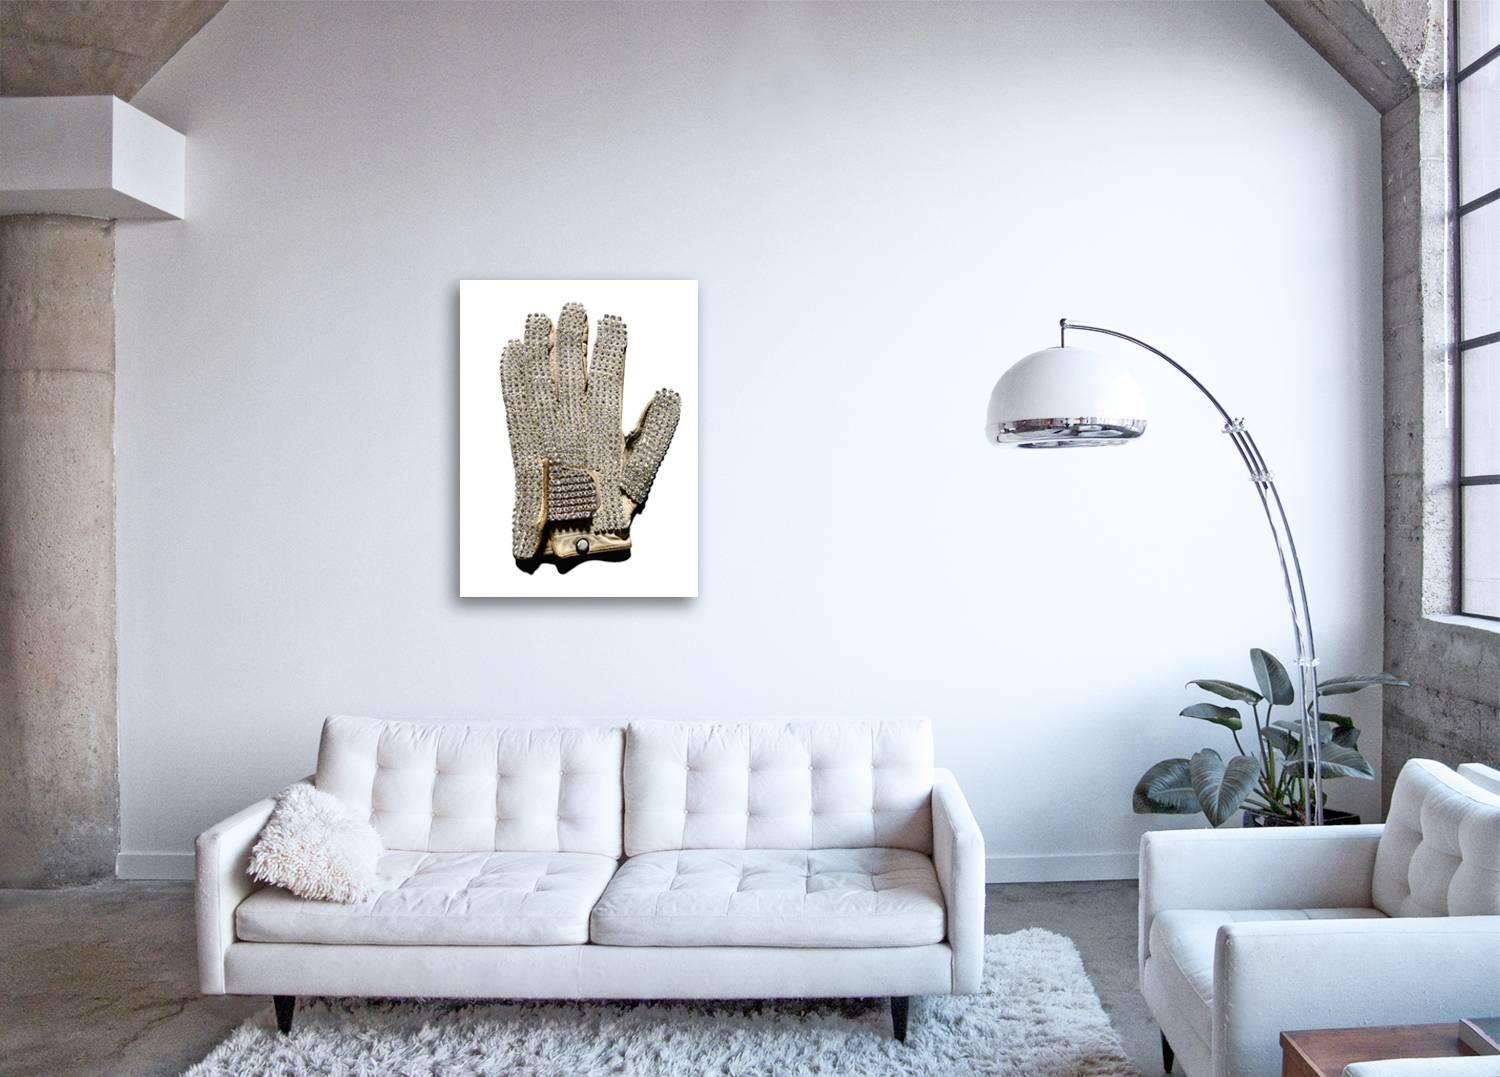 White Glove ( Michael Jackson ) - large format photograph of iconic rhinestones - Contemporary Photograph by Tom Schierlitz